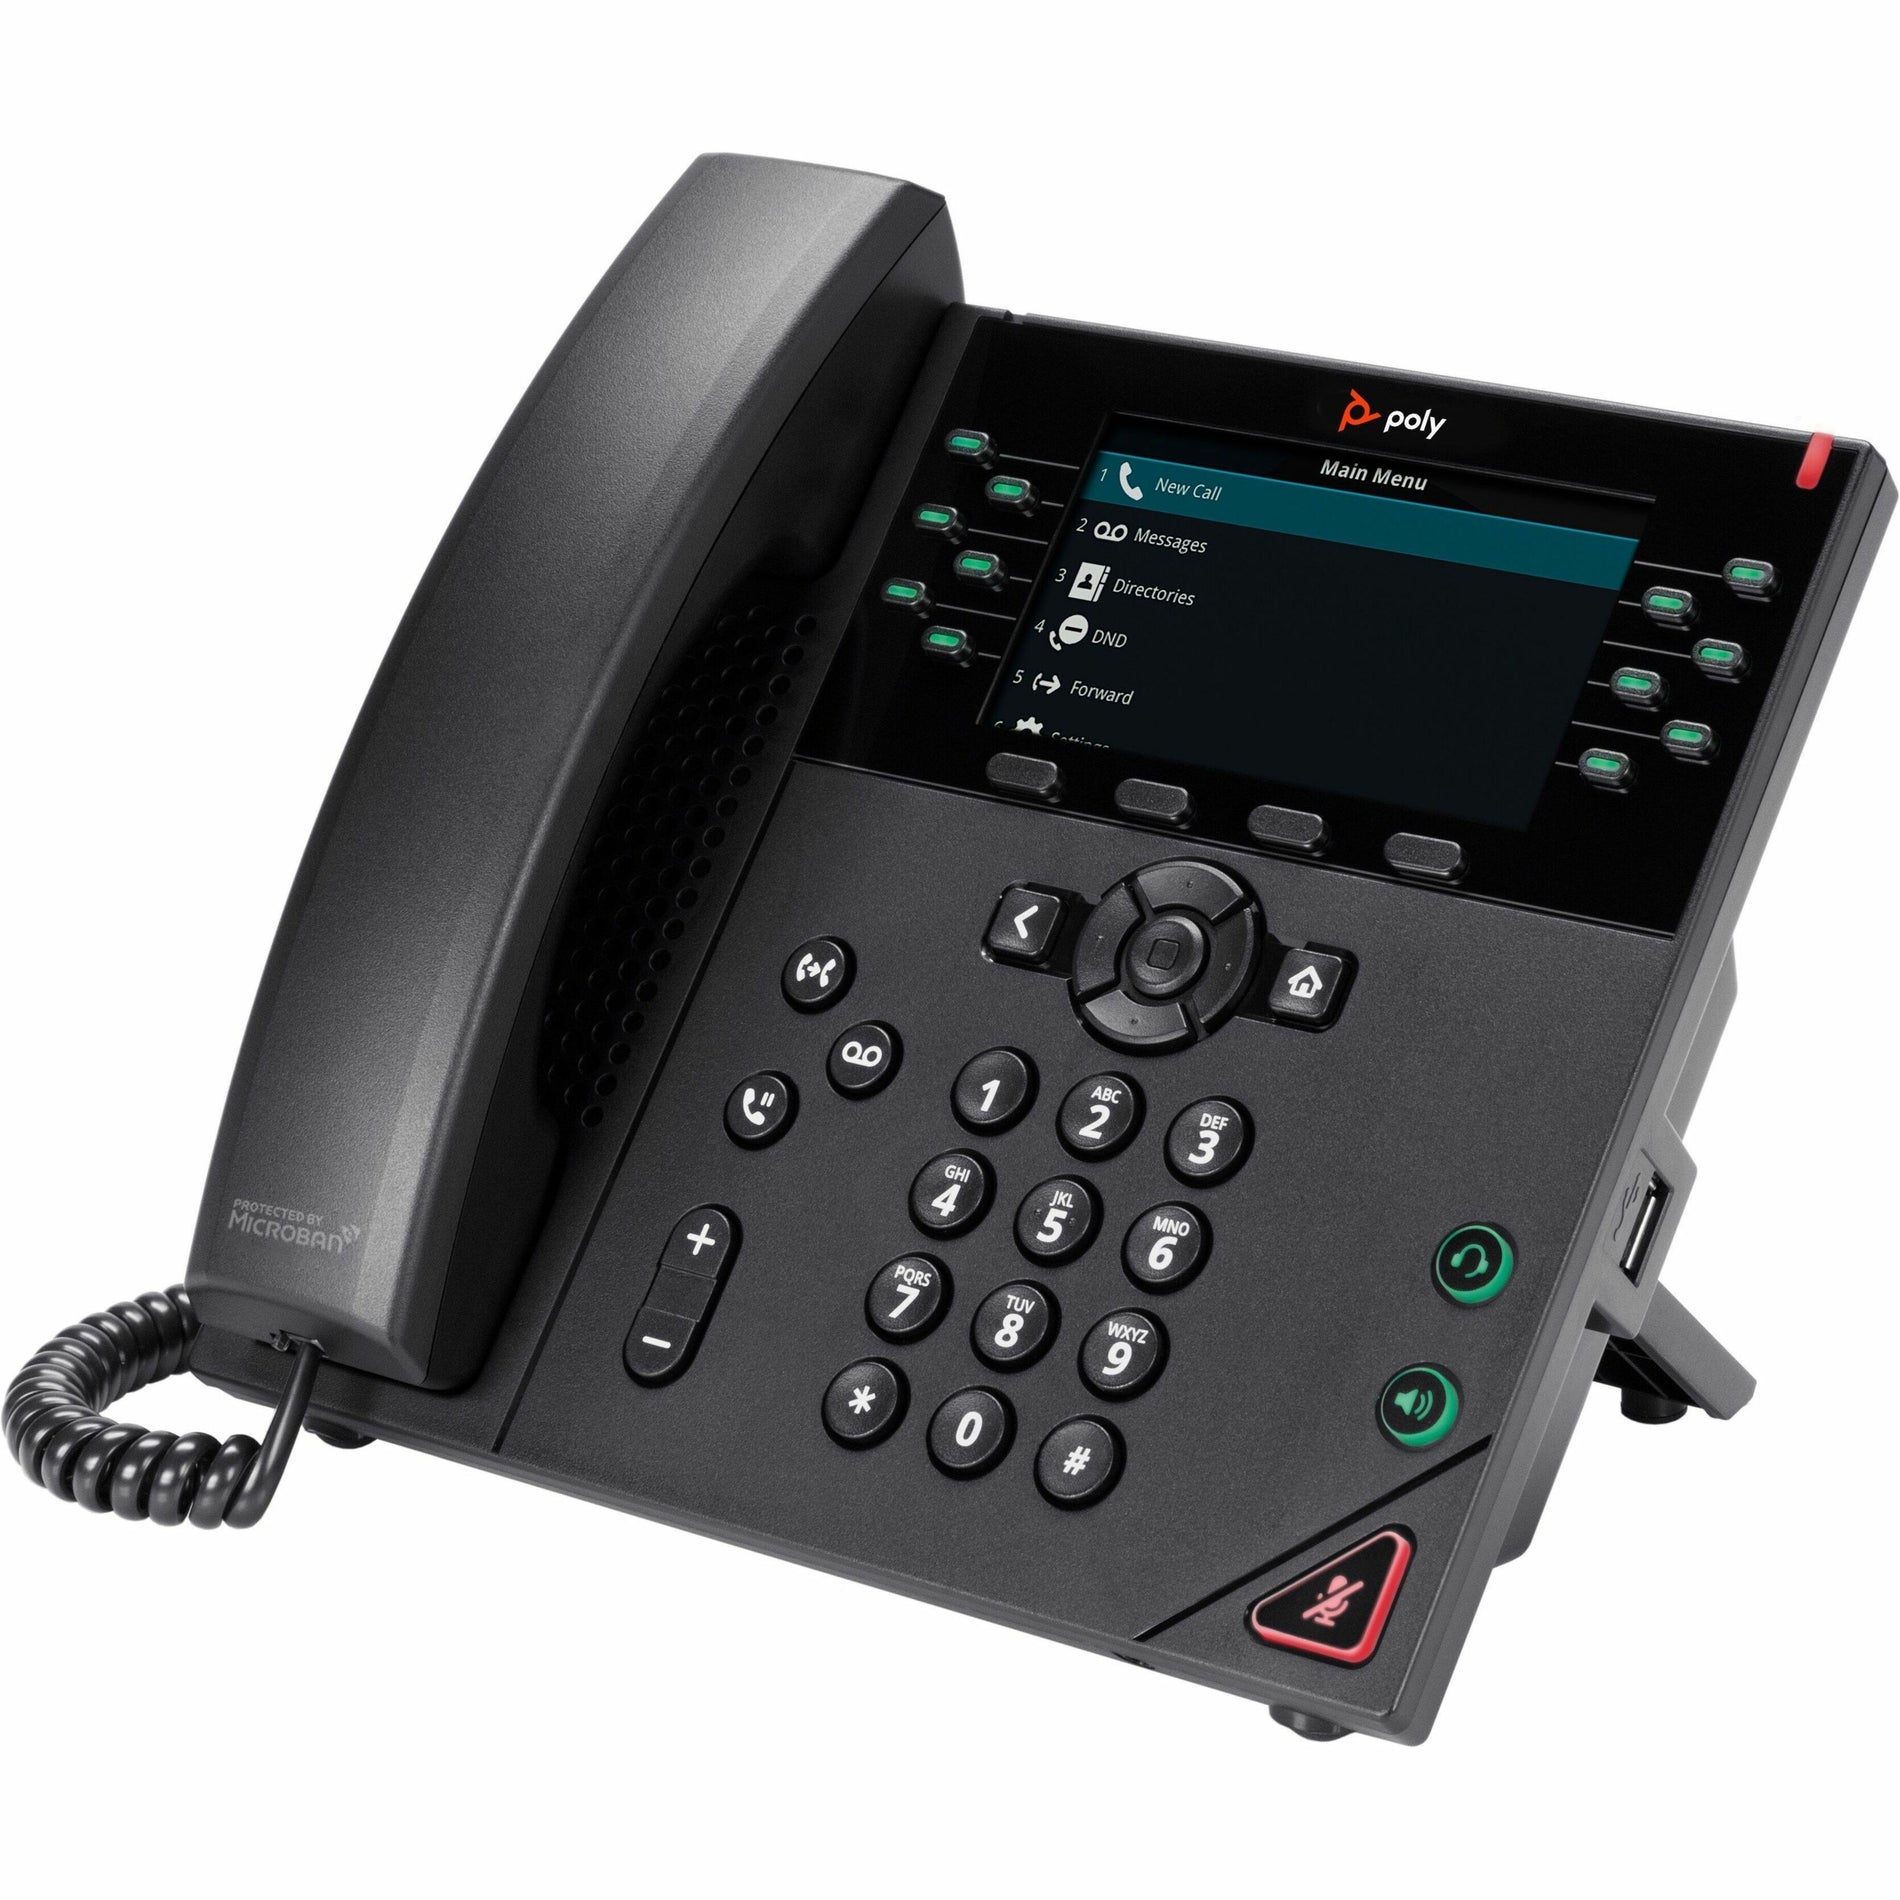 Poly 8B1L7AA#AC3 VVX 450 12-Line IP Phone and PoE-enabled, Energy Star, USB, Caller ID